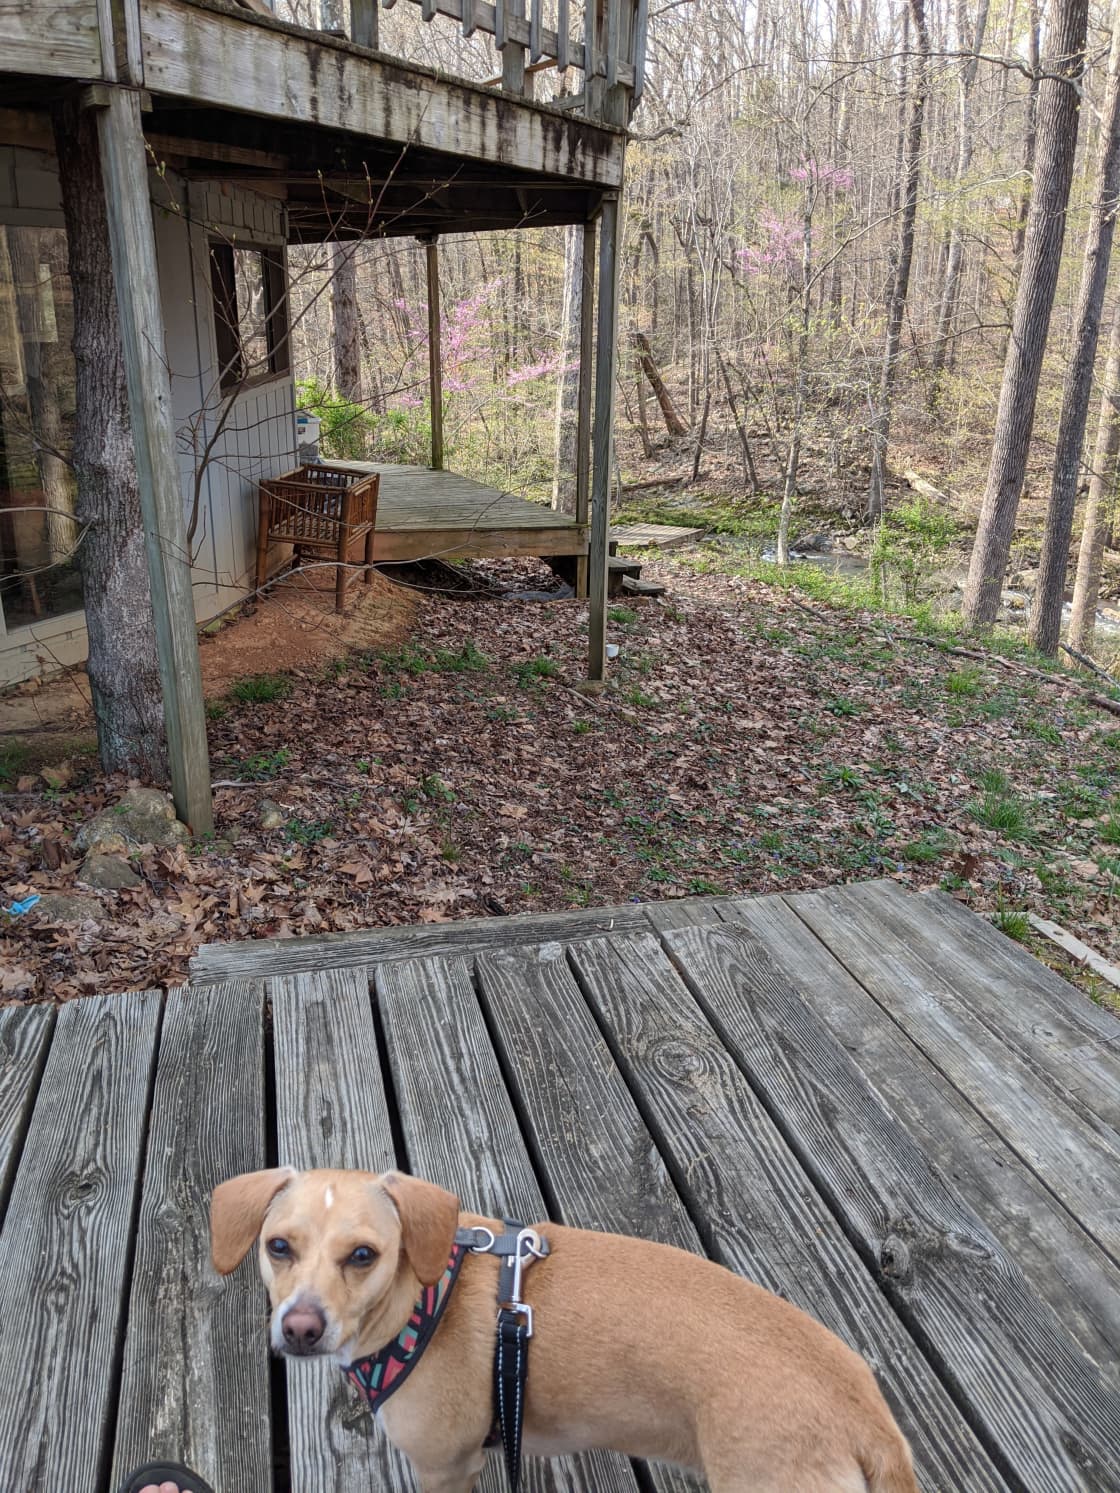 My very cute dog and part of the porch on the main house